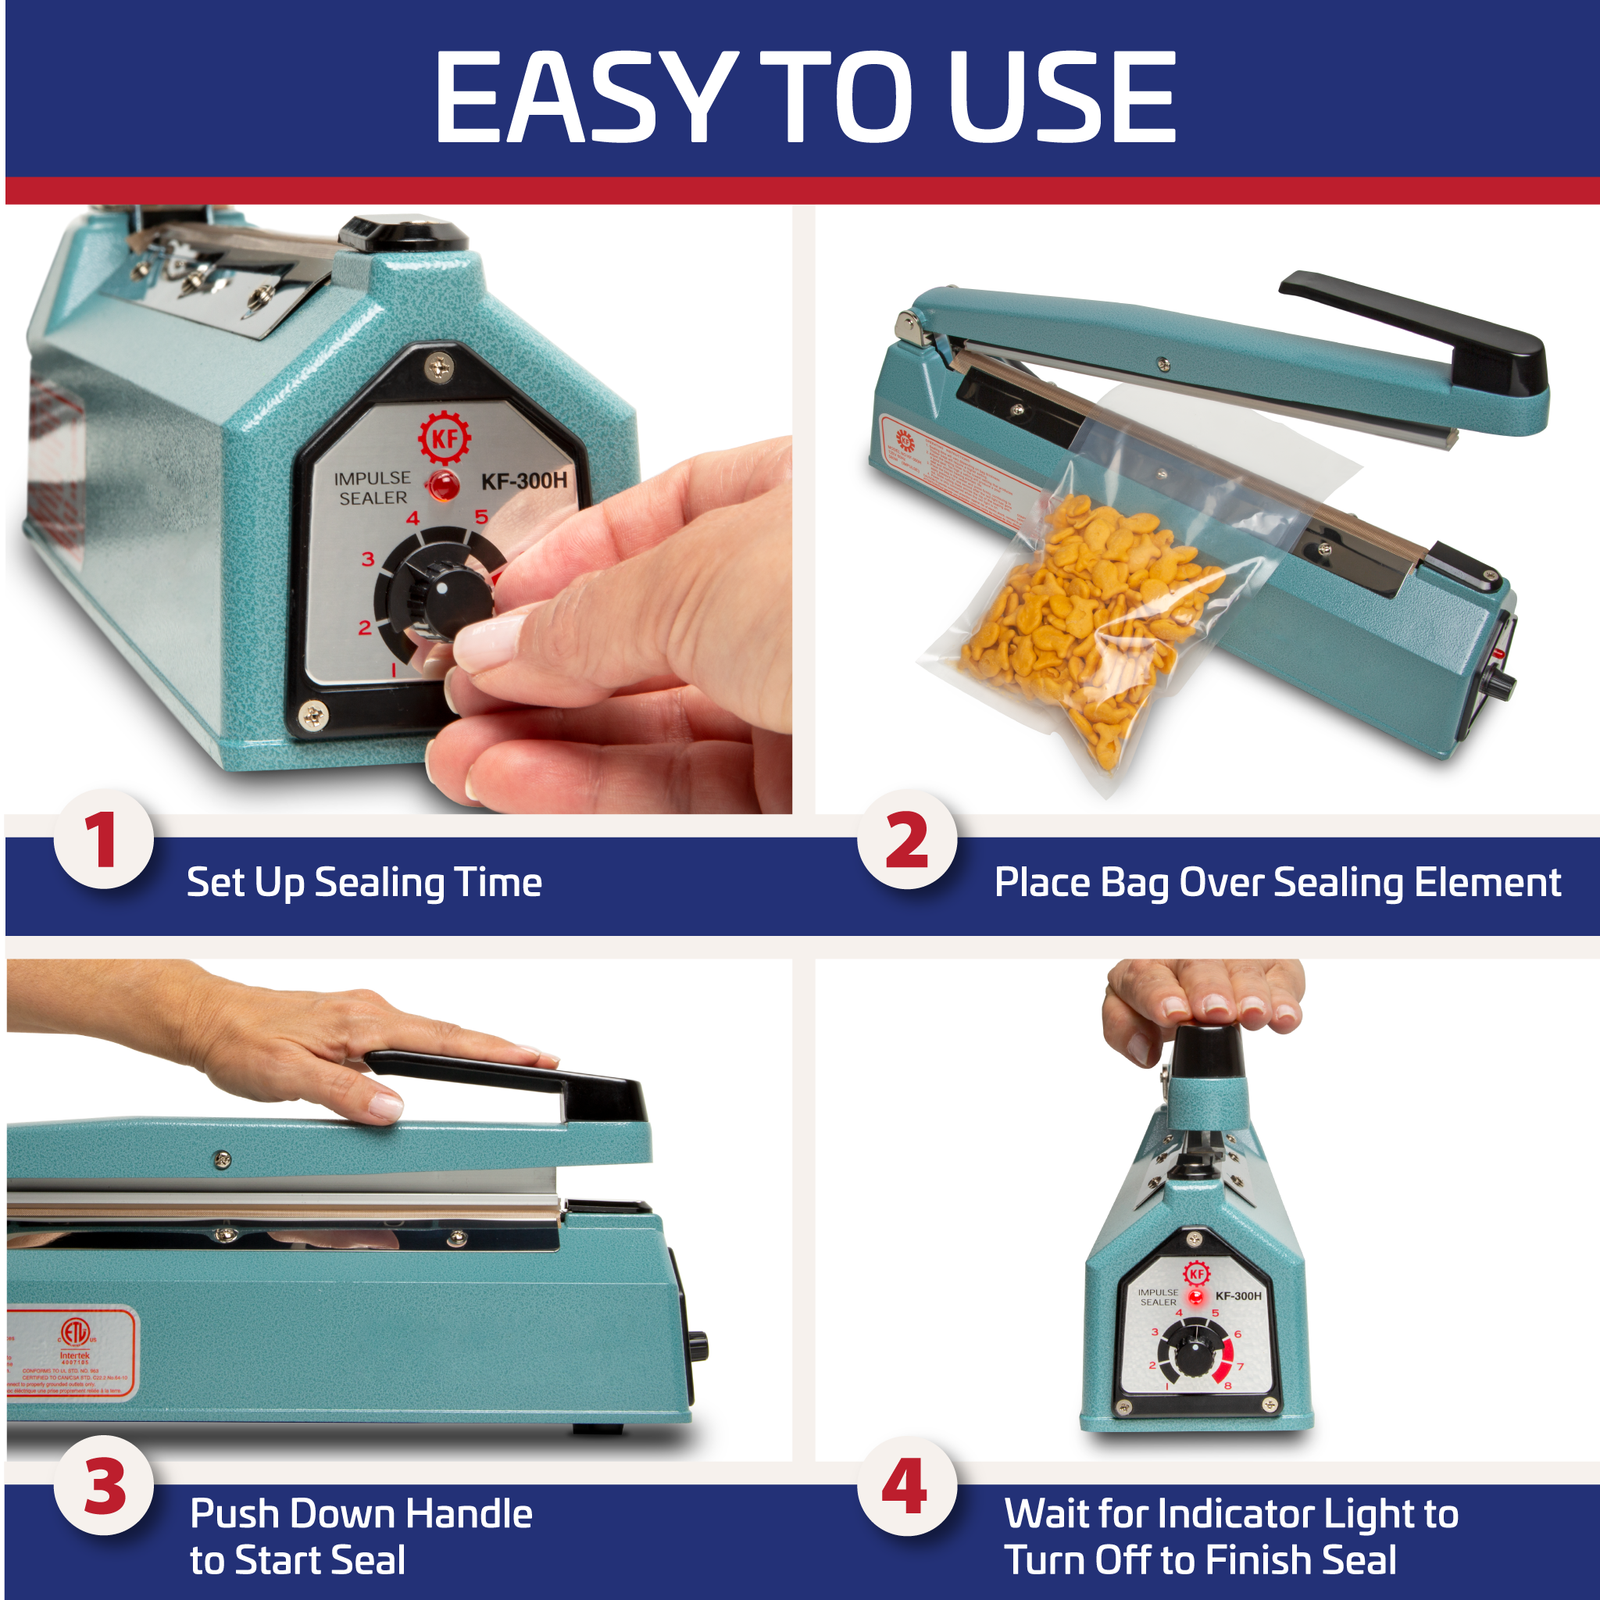 KF-300HC 12 inch Impulse Sealer with 2mm seal and Cutter